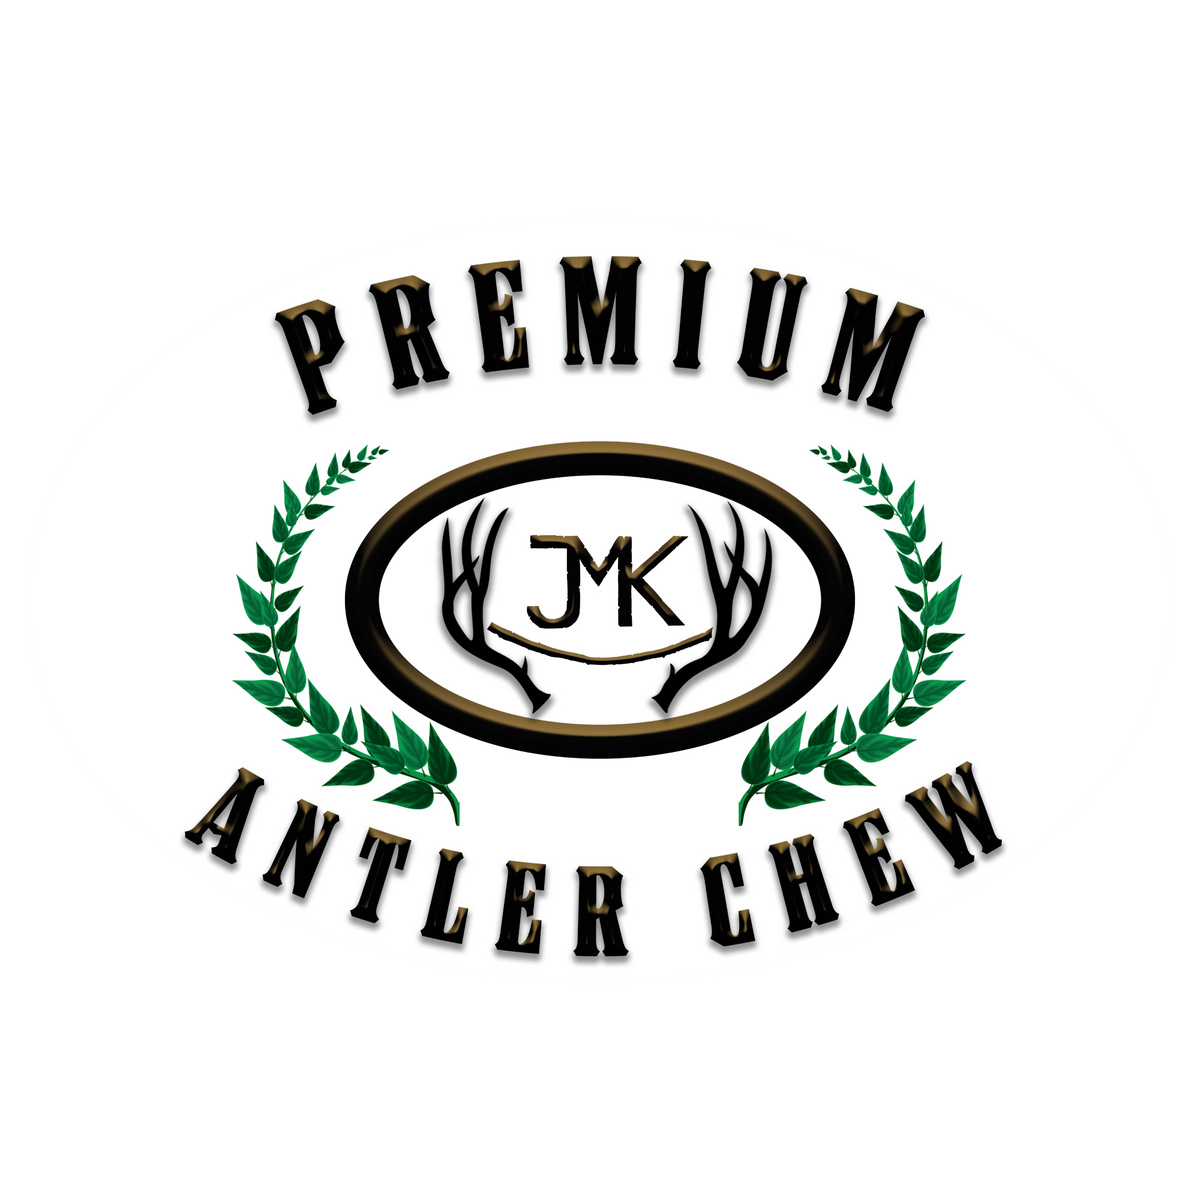 Premium A Grade natural dog treats. JMK Antler Chew dog treats are an excellent natural source of nutrients and minerals. JMK dog antler treats contain zero additives,  preservatives or antibiotics. JMK Antler Chews are a healthy dog treat alternative. 